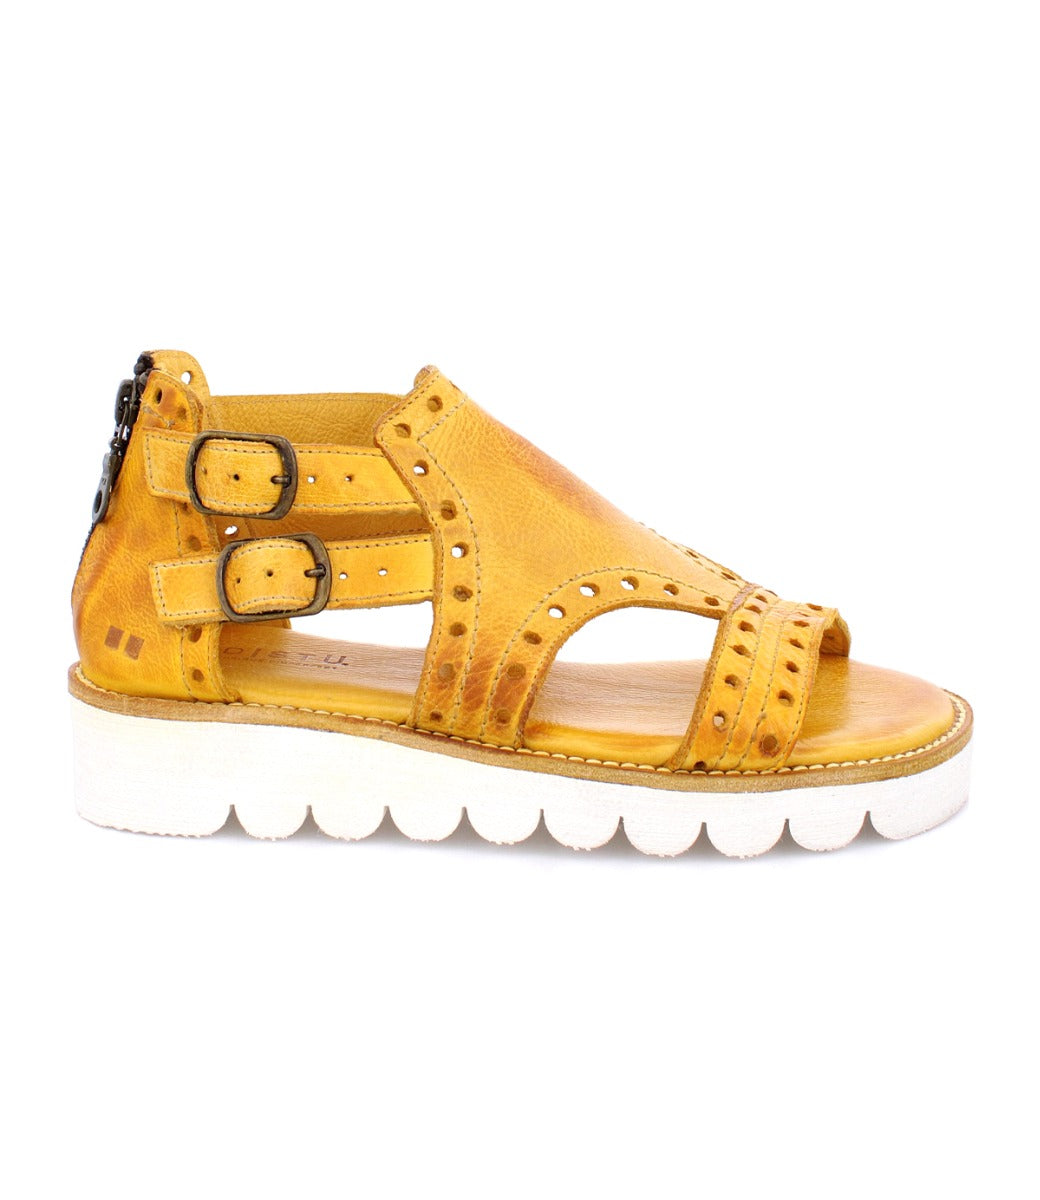 A women's yellow Camden sandal with buckles and a white sole by Bed Stu.